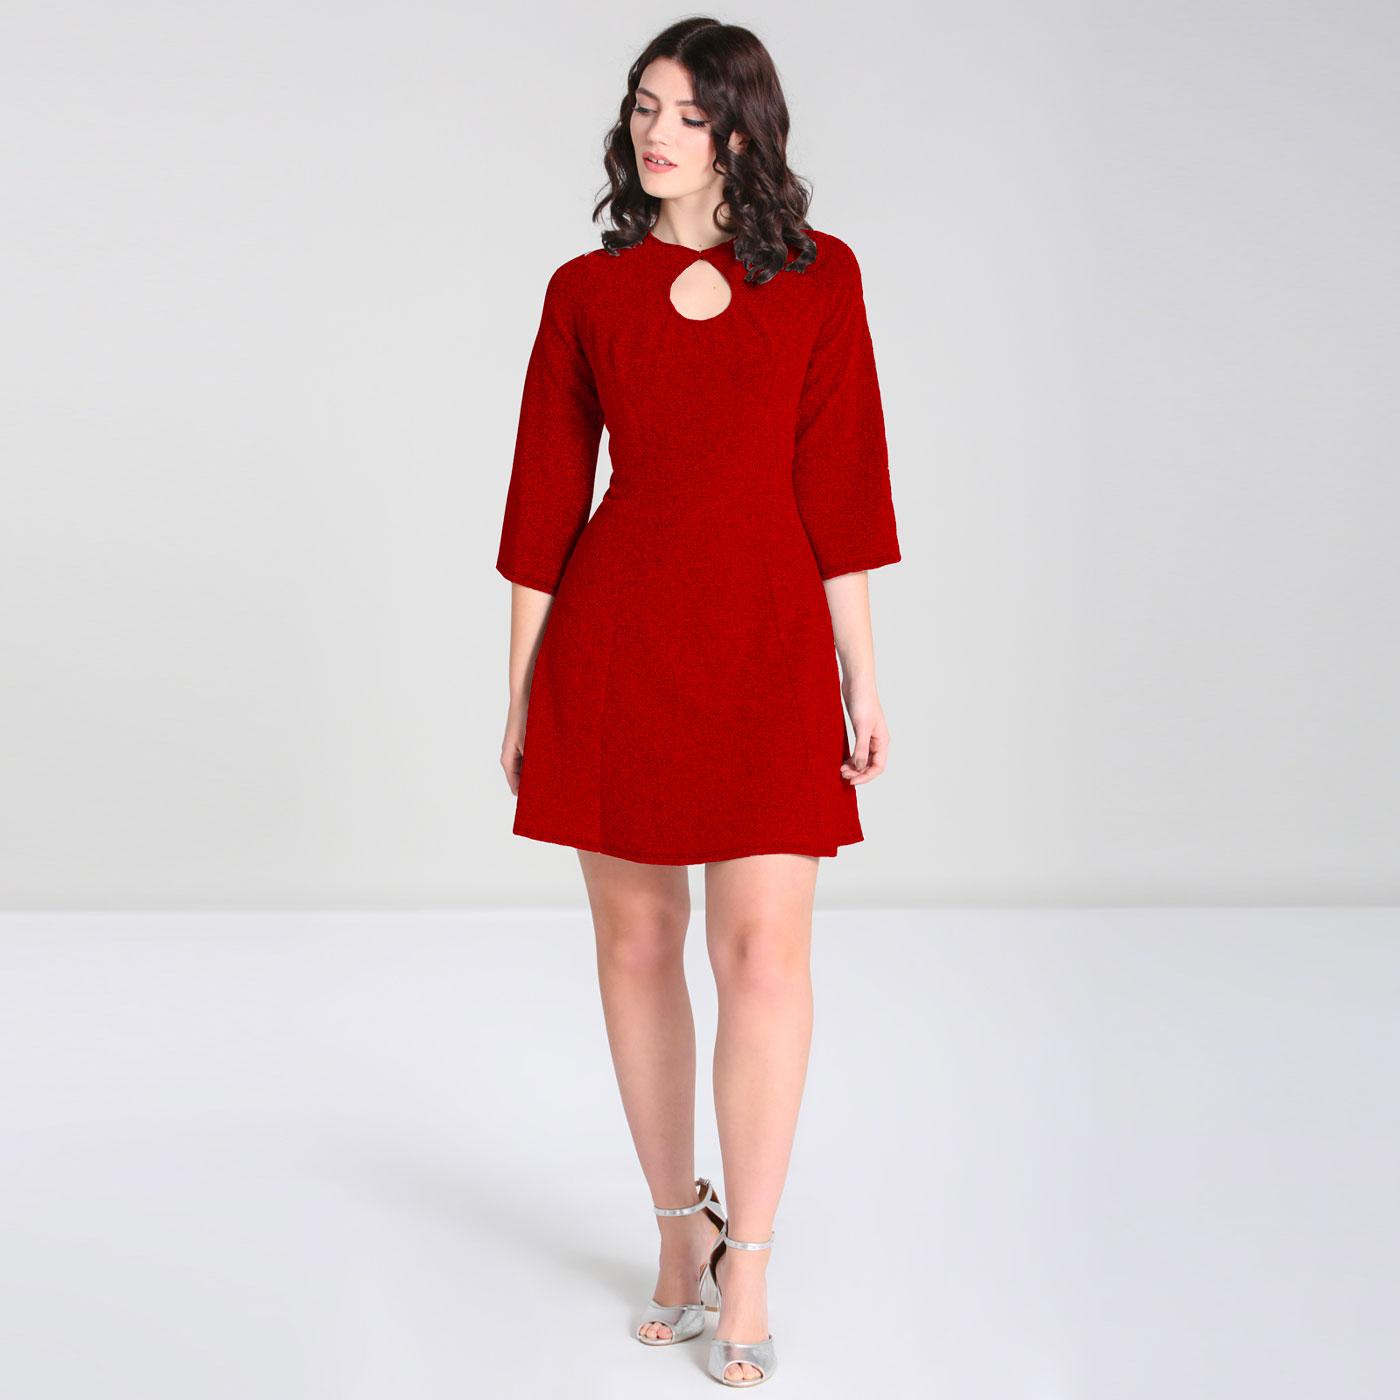 Hell Bunny Loco-Motion Retro Party Dress in Red